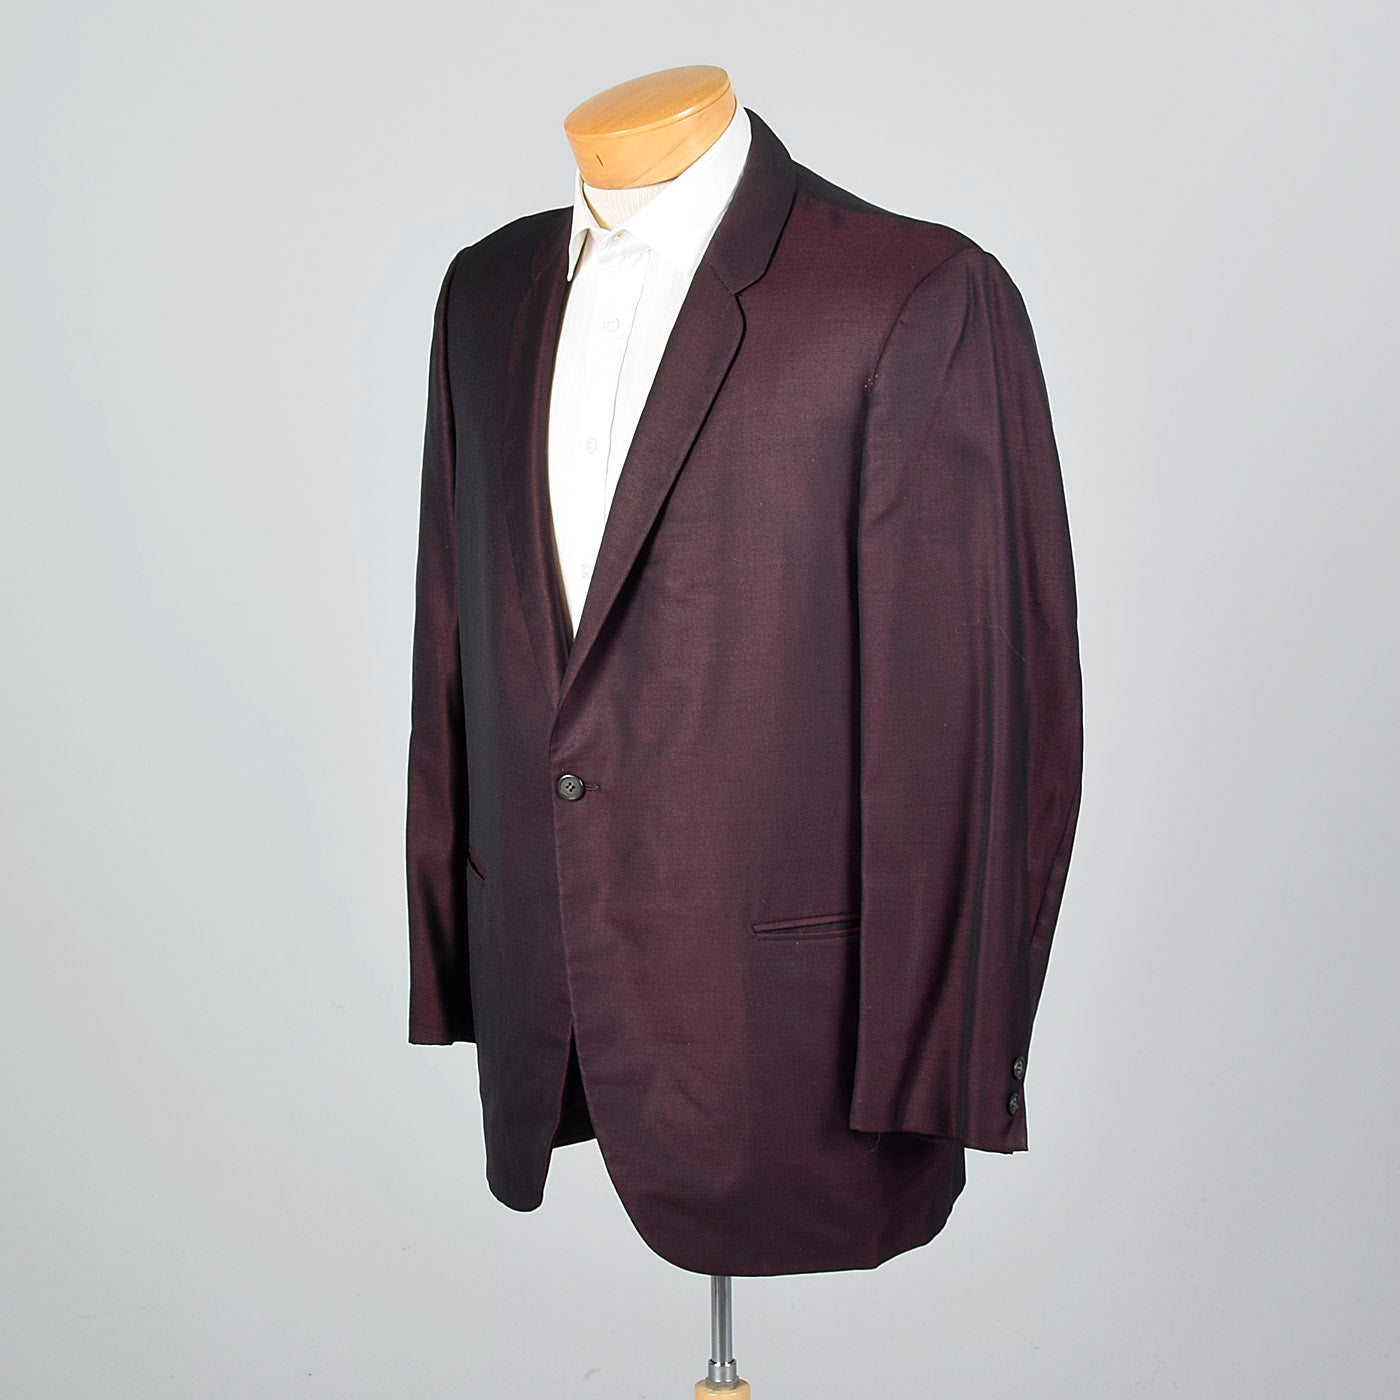 1950s Red and Black Sharkskin Jacket with Rounded Lapels